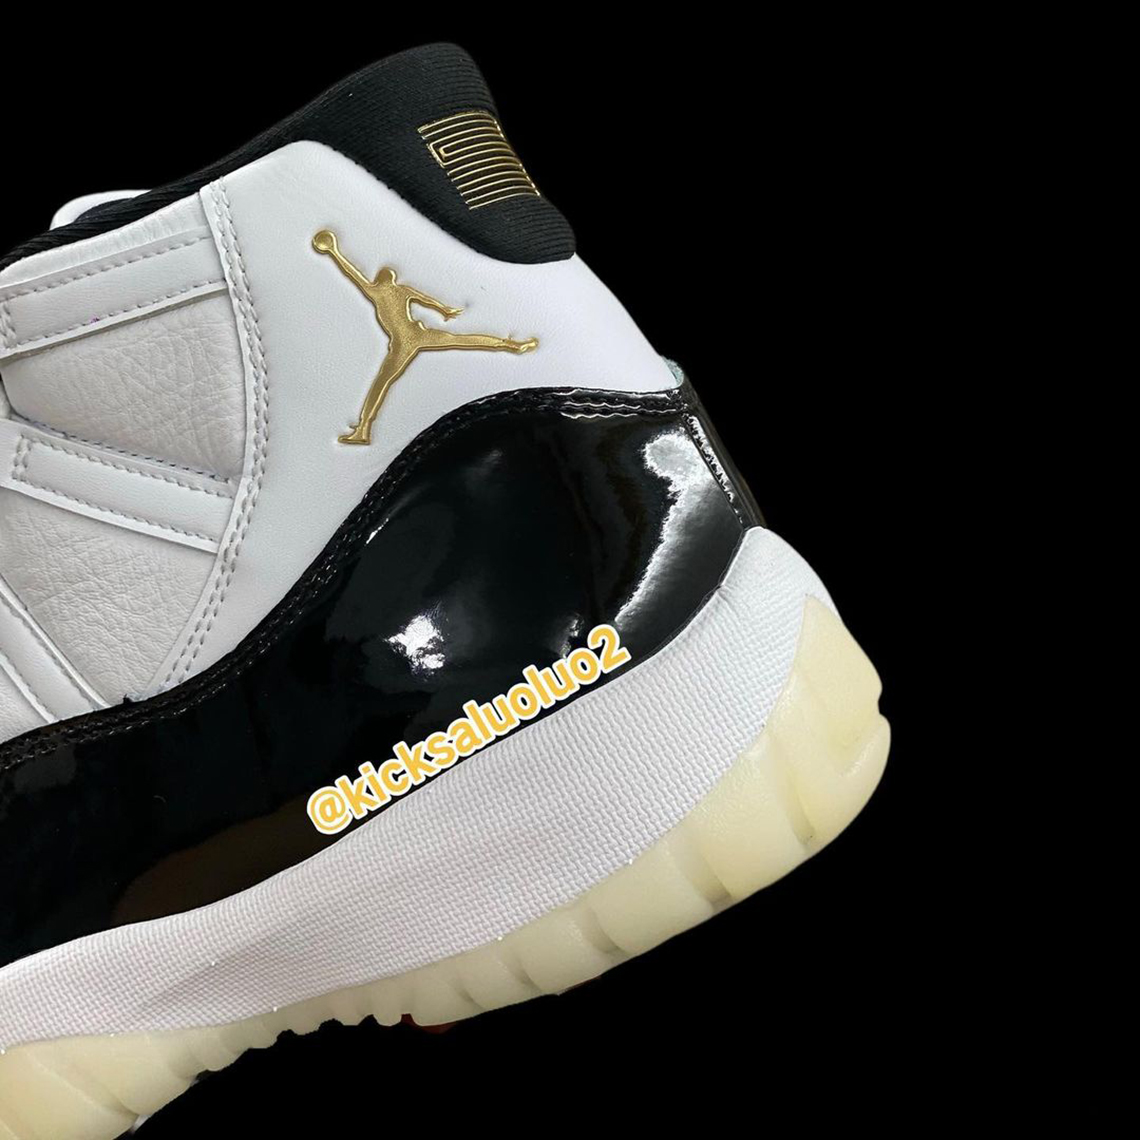 FIRST LOOK OF THE 2023 JORDAN 11 “GRATITUDE” DMP THESE ARE WAY